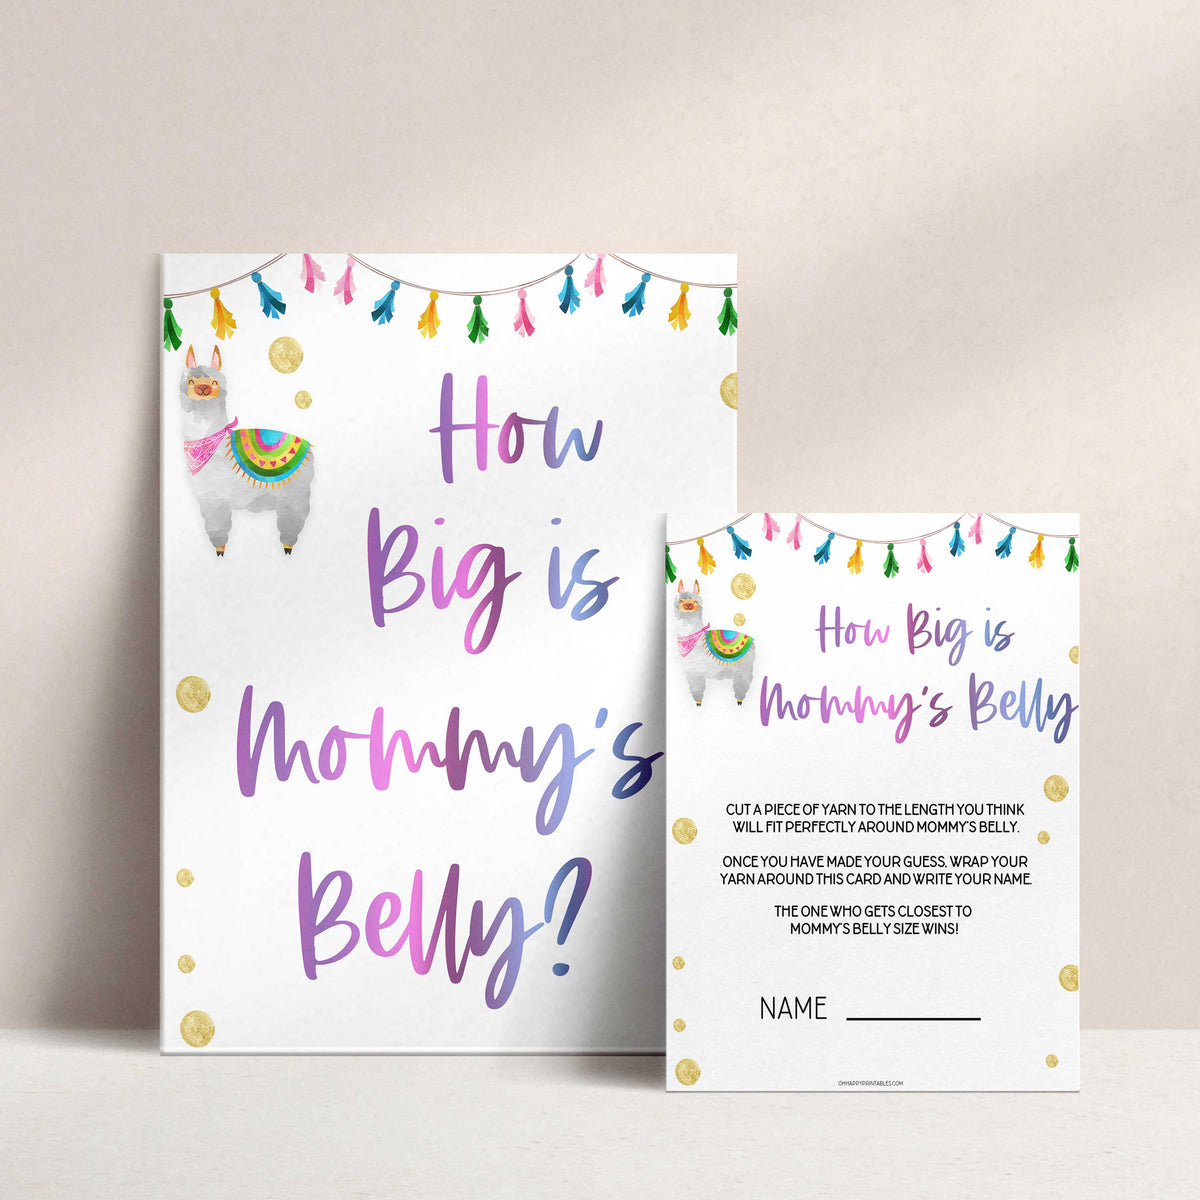 how big is mommys belly game, Printable baby shower games, llama fiesta fun baby games, baby shower games, fun baby shower ideas, top baby shower ideas, Llama fiesta shower baby shower, fiesta baby shower ideas